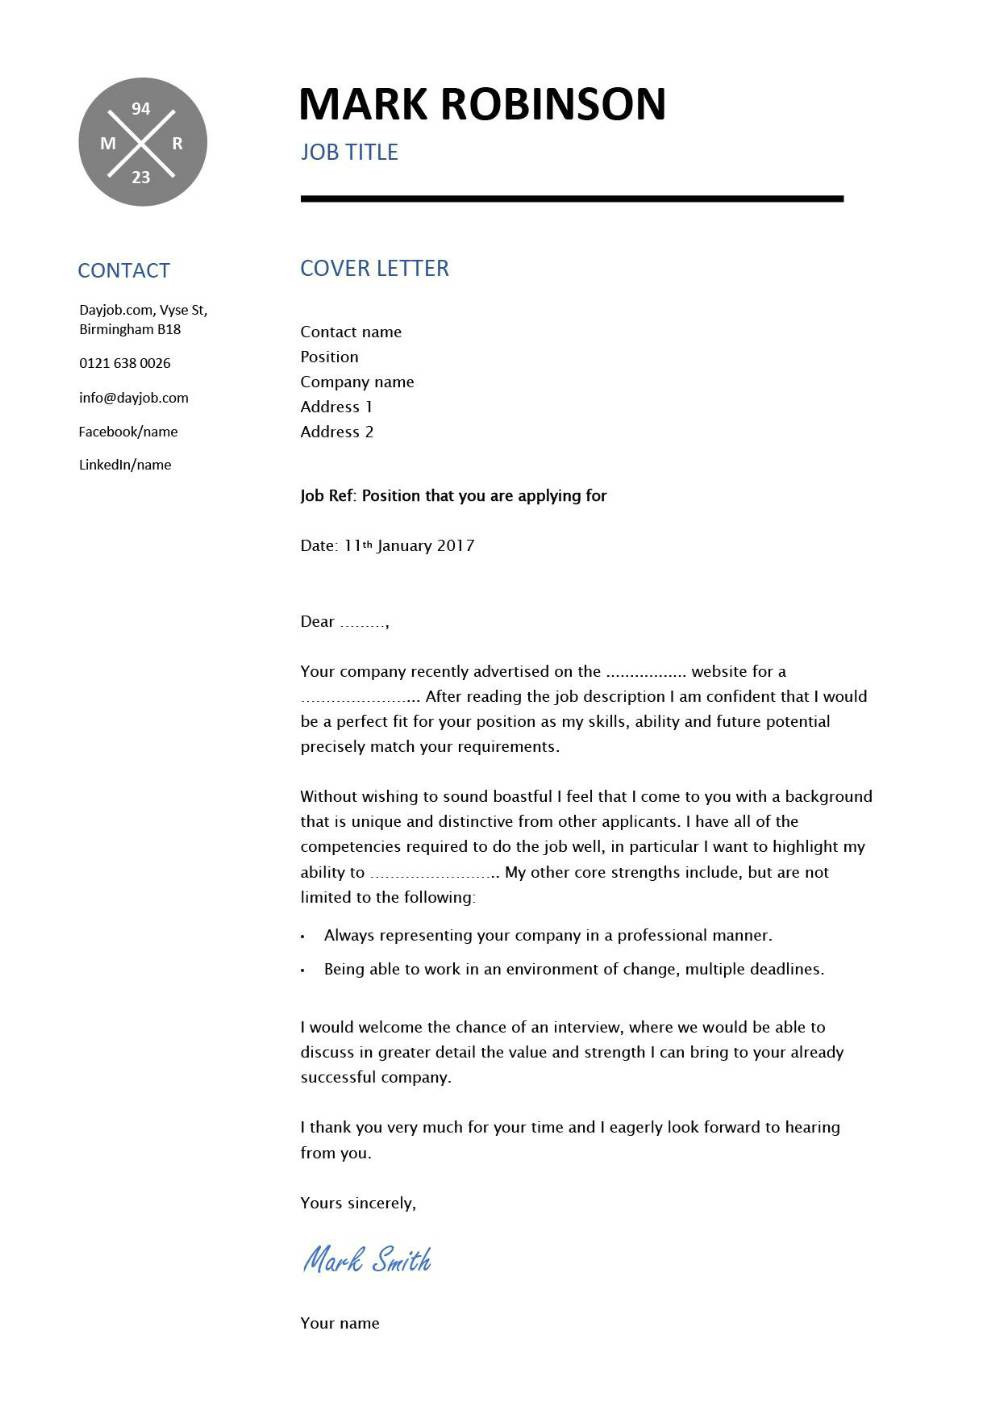 Modern Cover Letter Template Latest Modern Template Designs Page 2 Dayjob